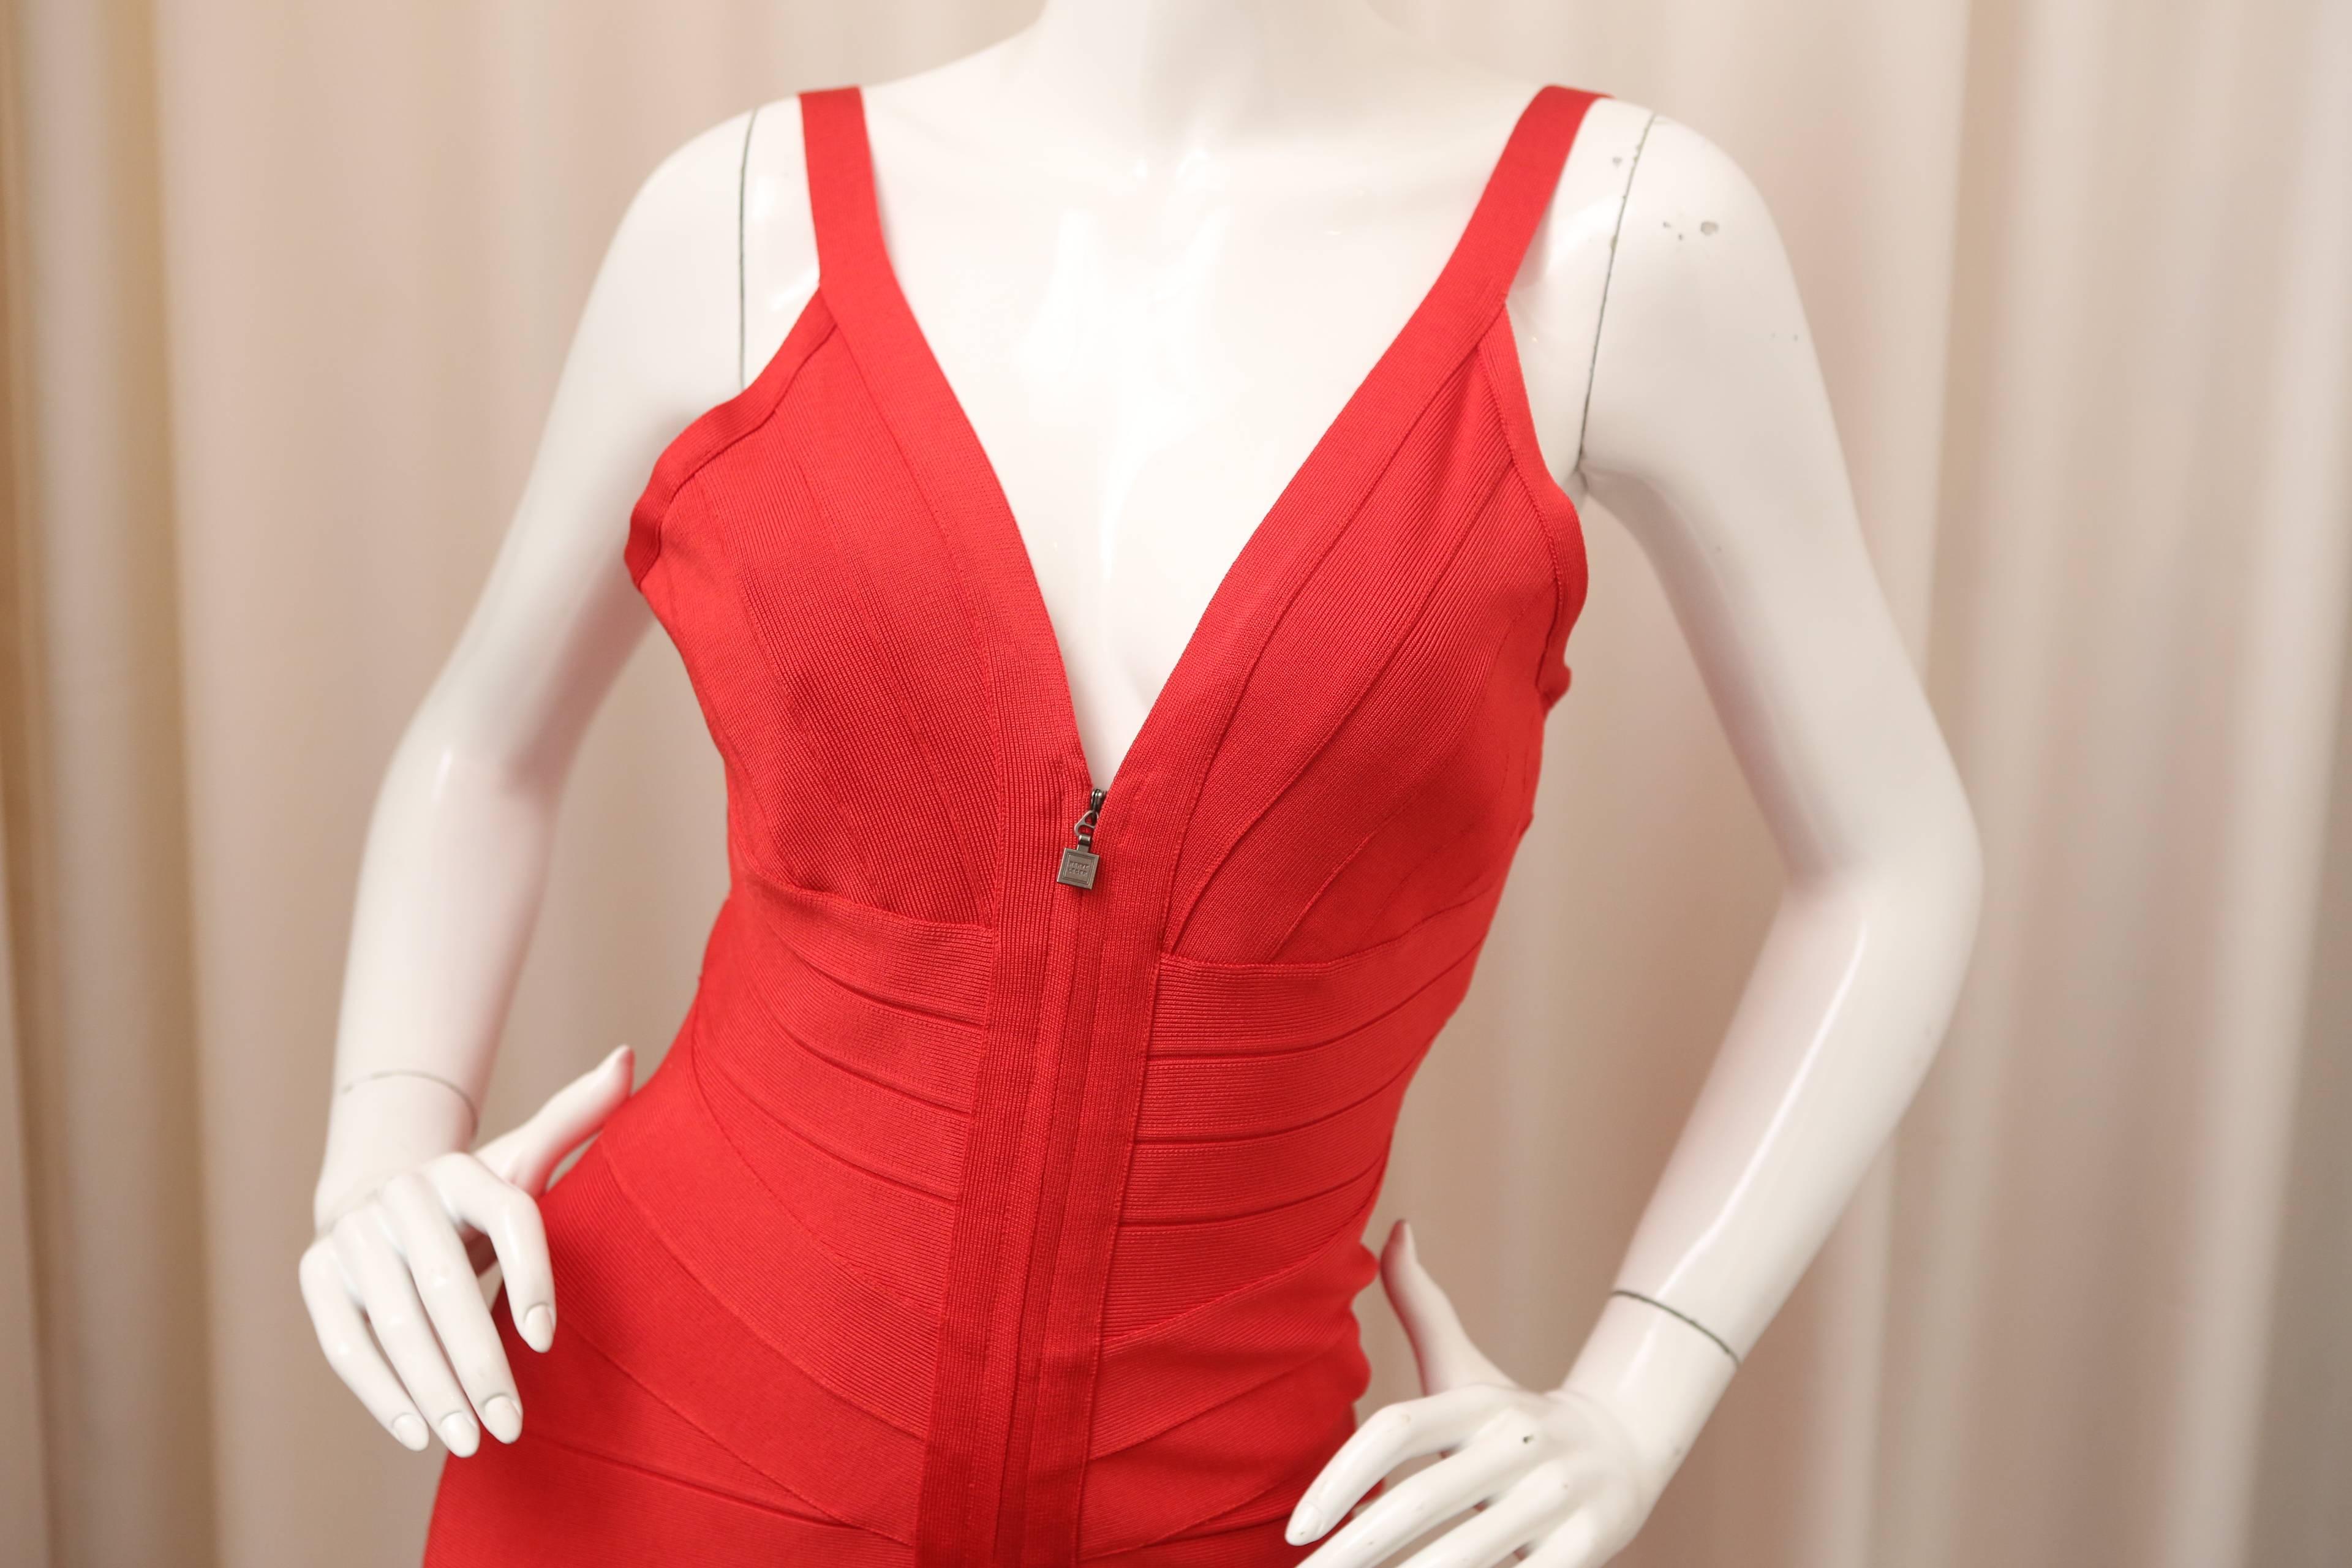 Herve Leger red bandage dress with front zipper.